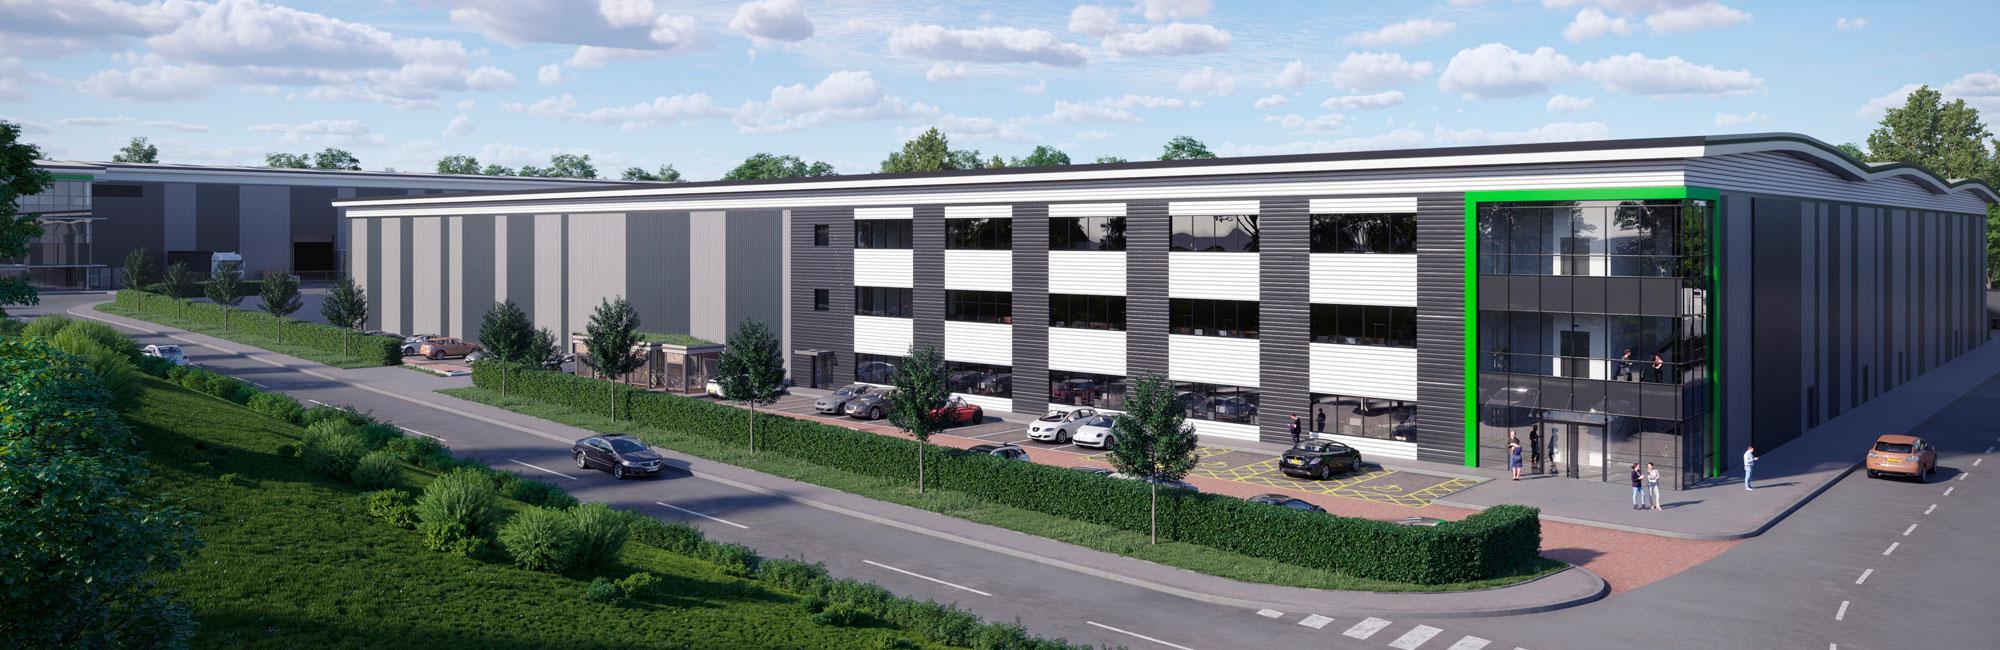 London Brentwood Commercial Park warehouse CGI